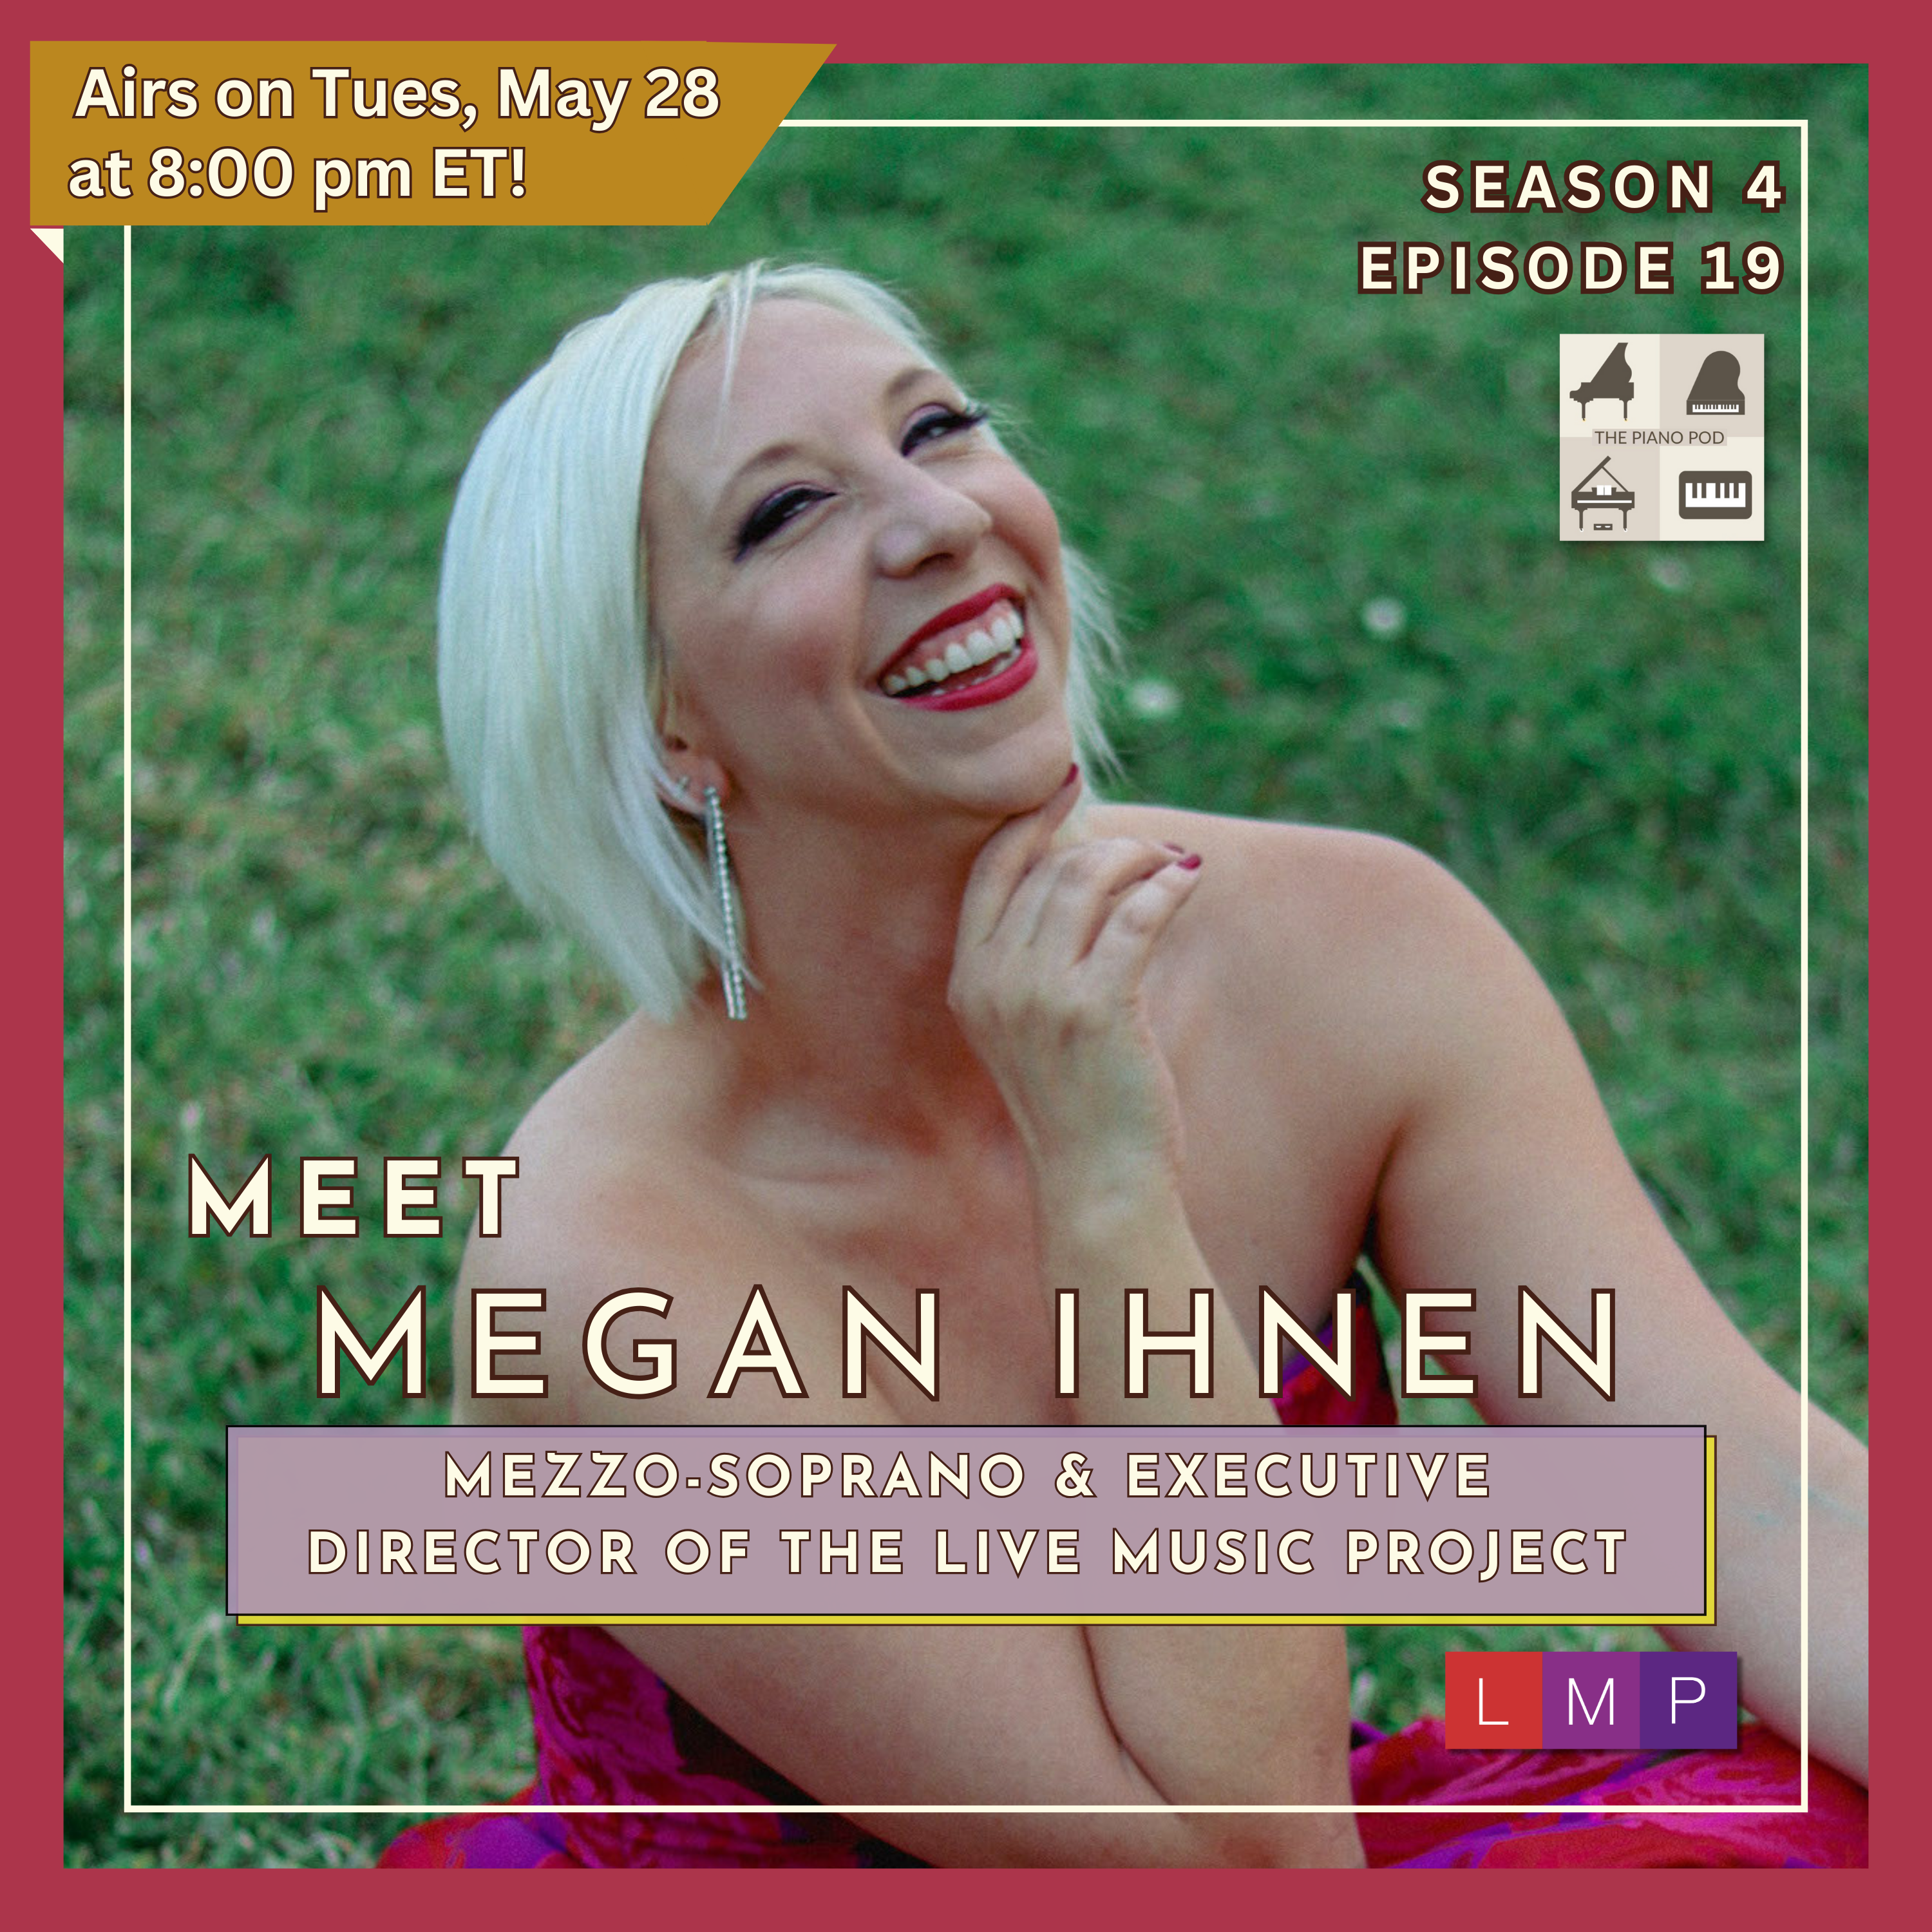 Trailer for Season 4 Episode 19: Megan Ihnen, Connecting Contemporary Audiences – Live Music Project: Bridging Musicians and Audiences, Empowering Next Generation Innovators "